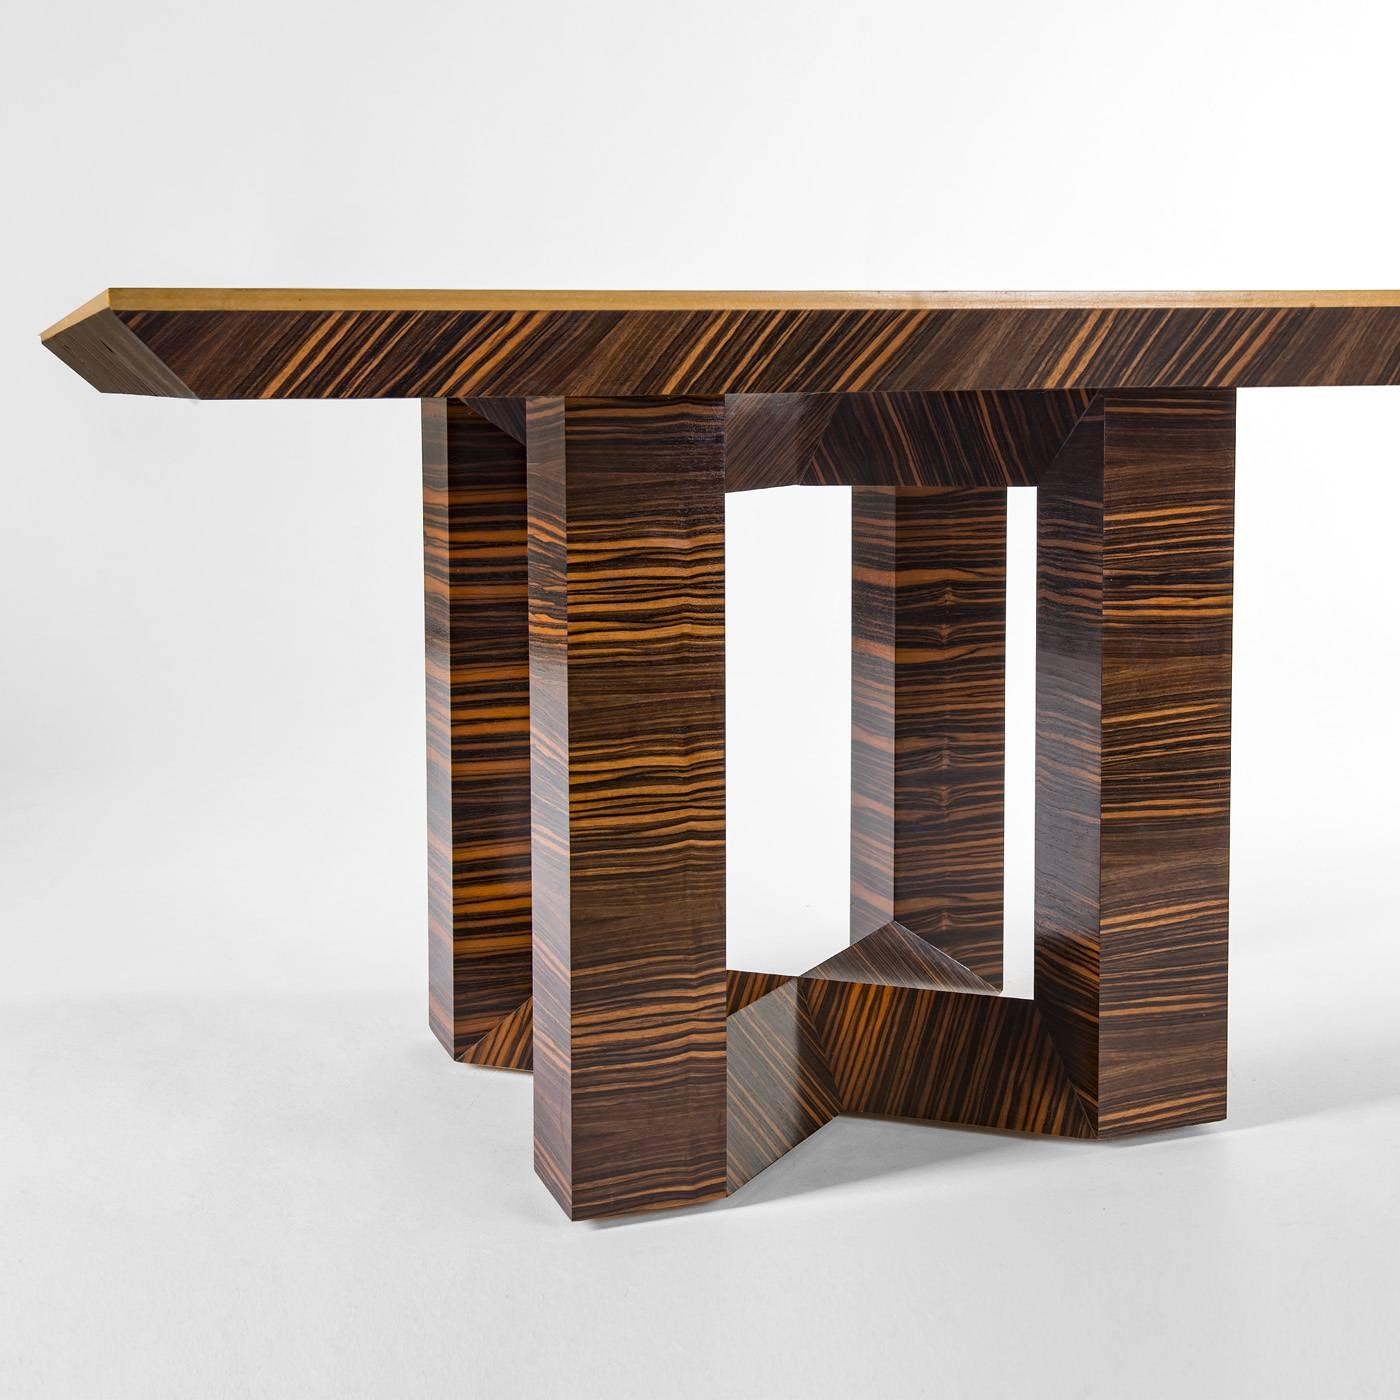 This square table features a unique look that will make a statement when placed in any home. The structure of the tabletop was crafted in ebony Macassar wood, which has been worked using a interwoven technique creating alternating grain patterns.